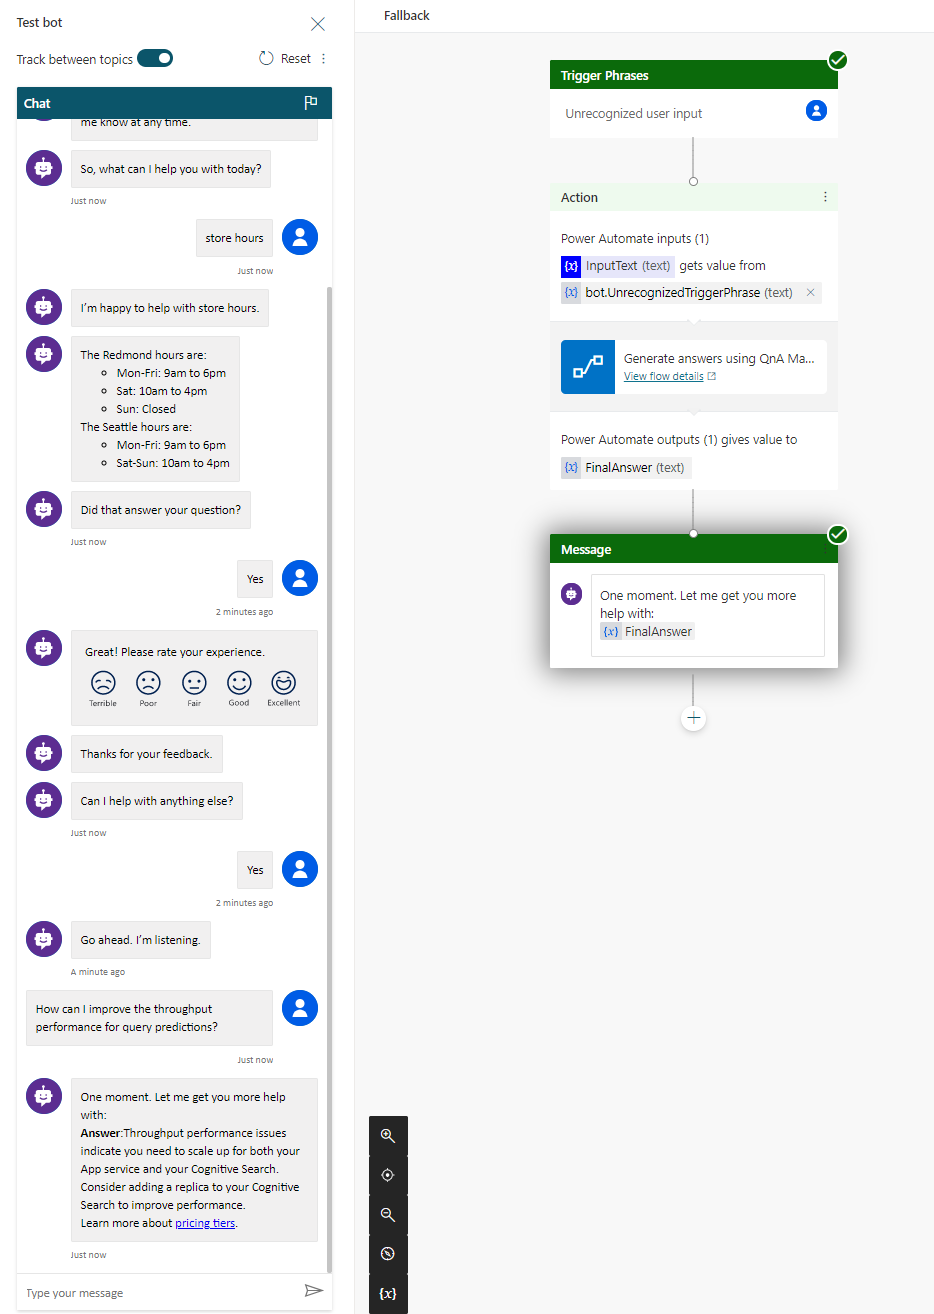 Screenshot of chat bot with canvas indicating green checkmarks for successful actions.